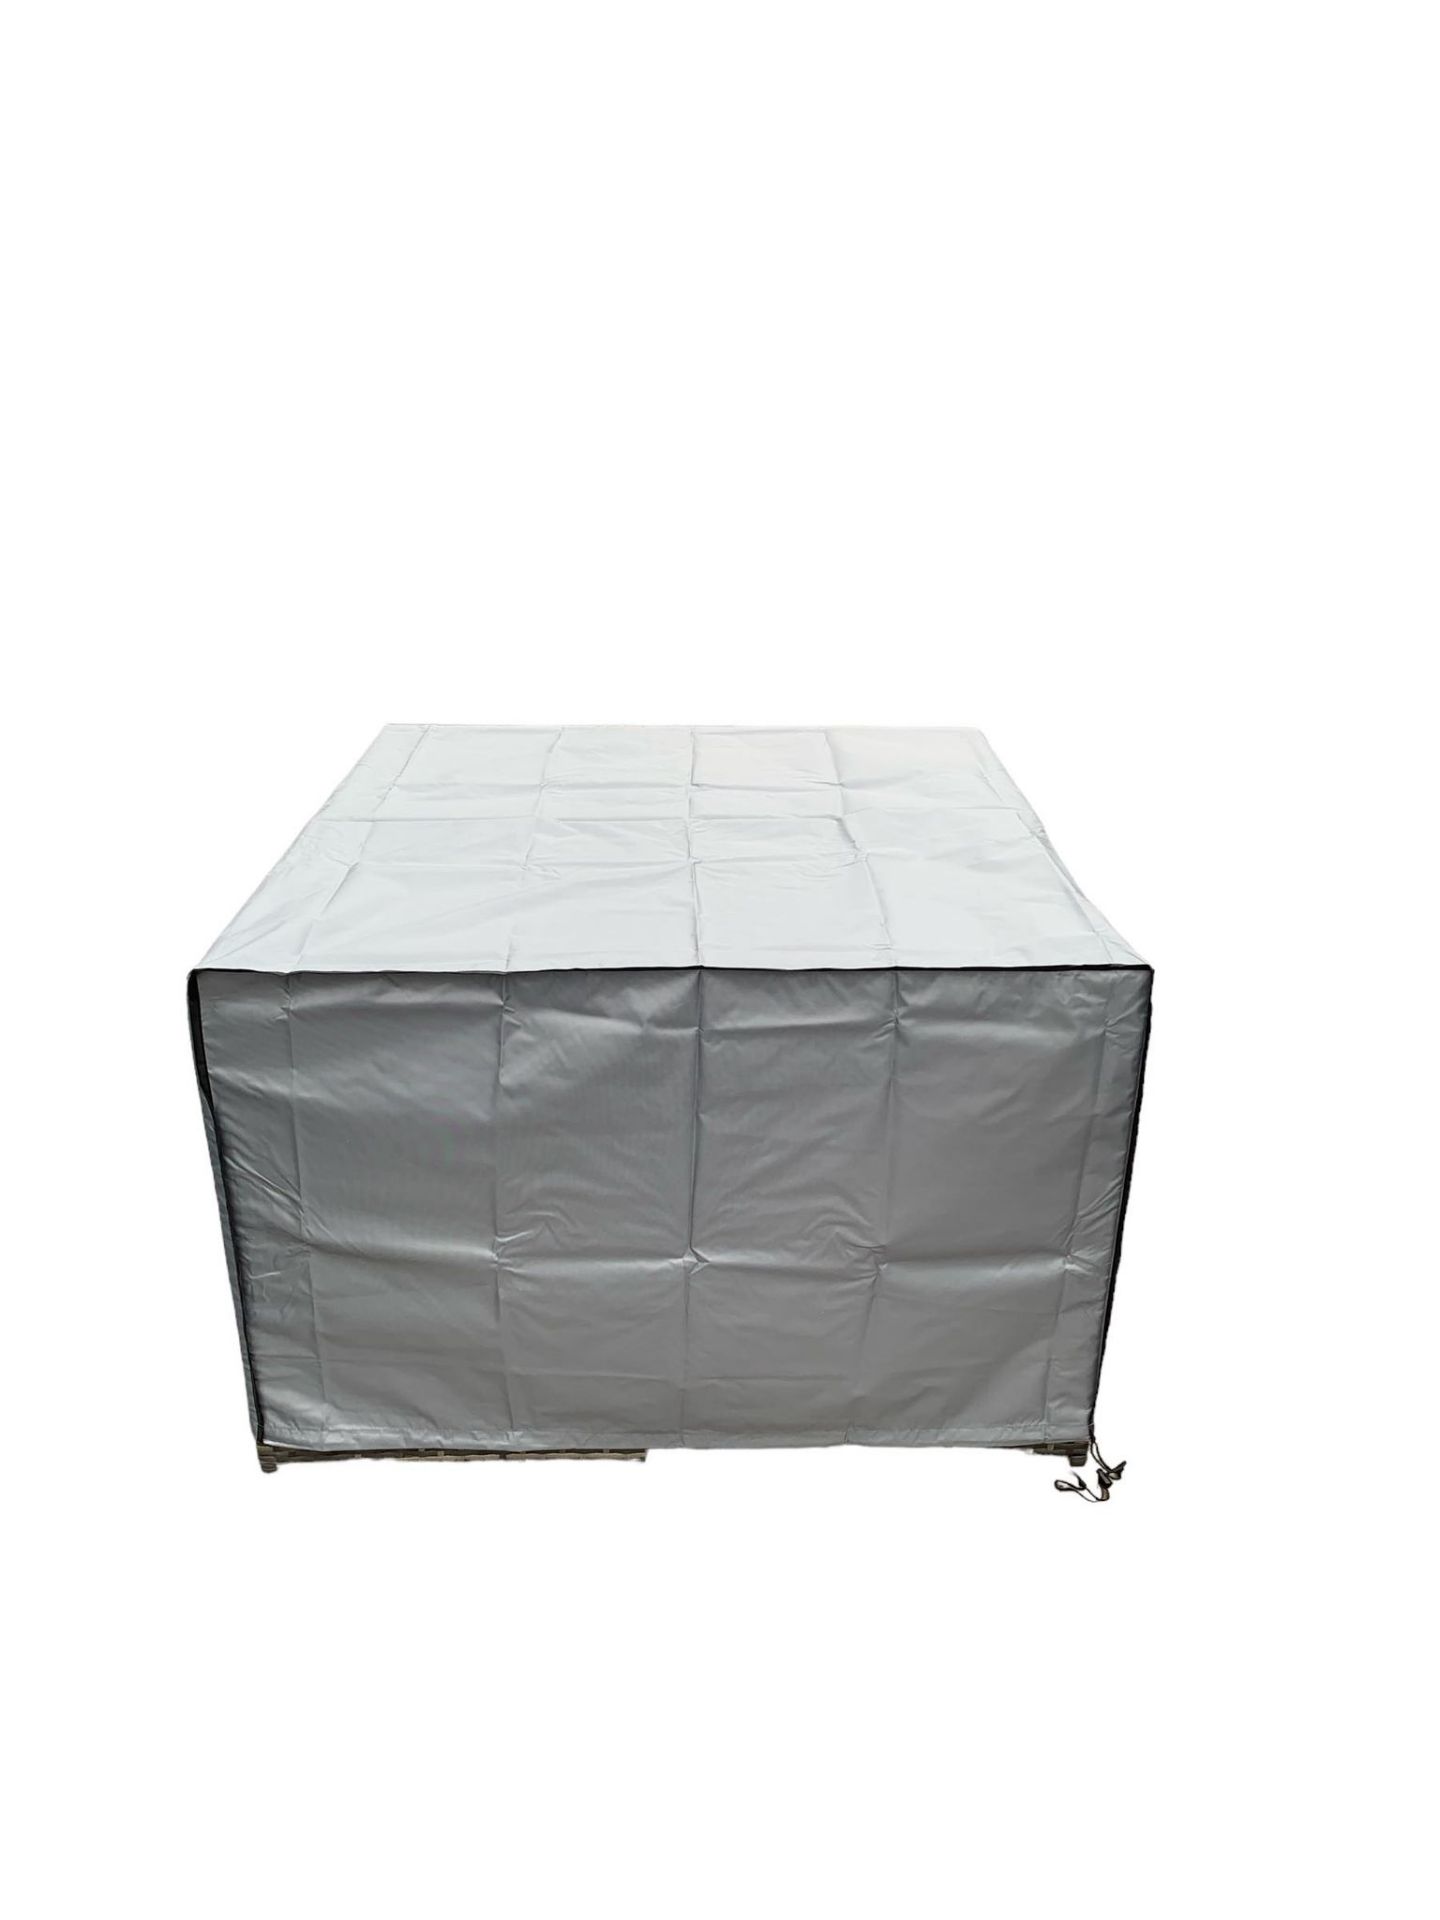 BRAND NEW GREY CUBE GARDEN FURNITURE SET OUTDOOR 9 PIECES + RAIN COVER - Image 6 of 6